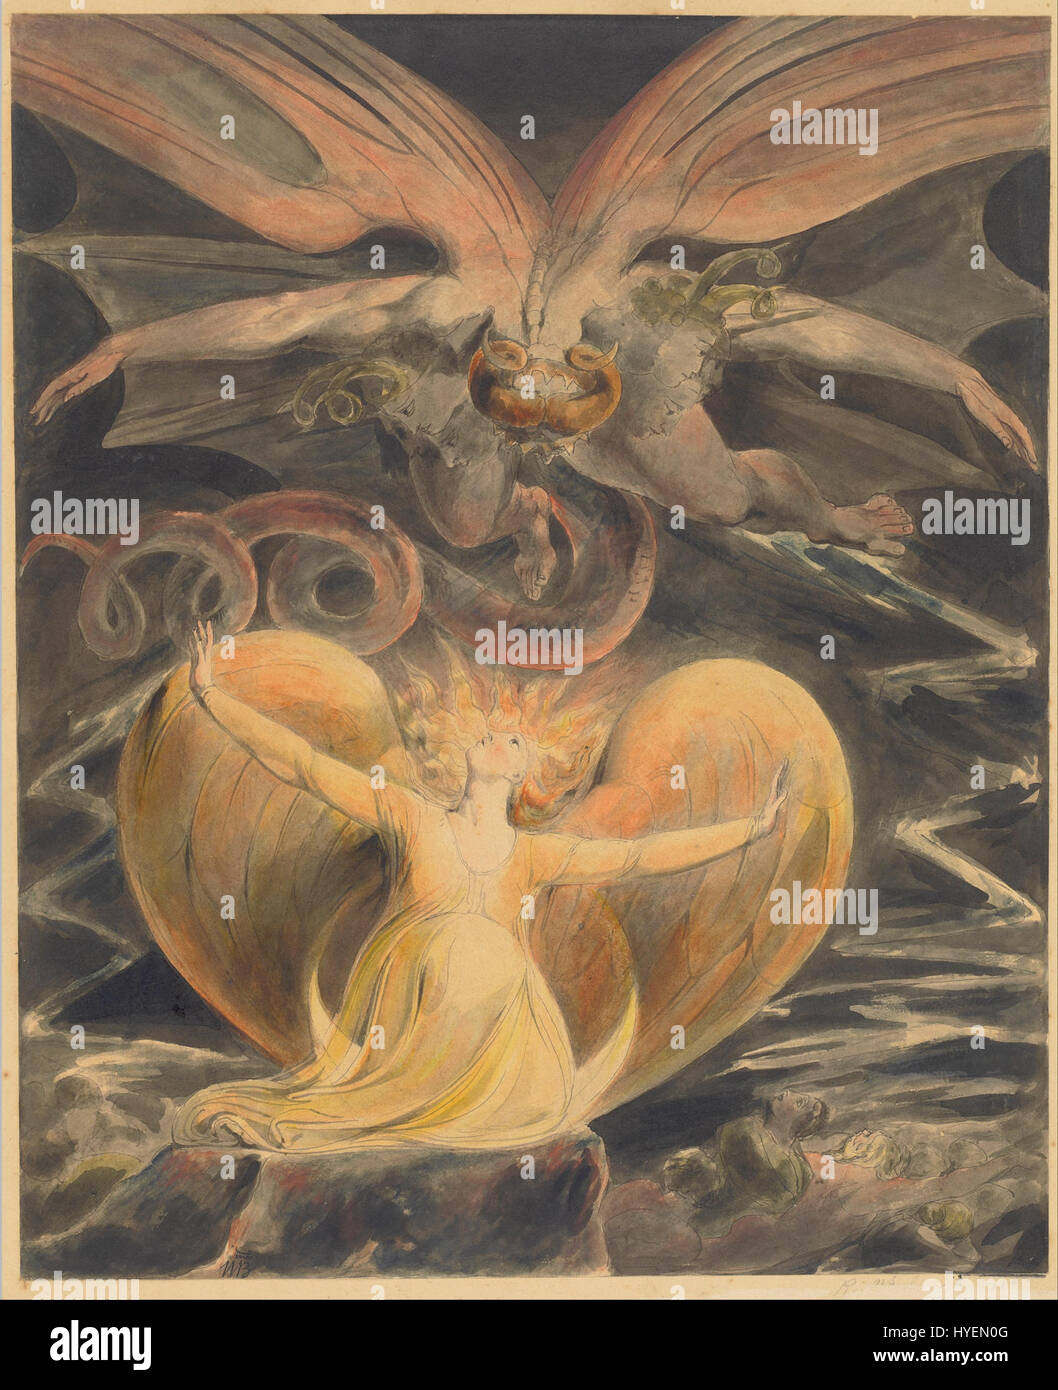 William Blake   The Great Red Dragon and the Woman Clothed with the Sun   Google Art Project Stock Photo